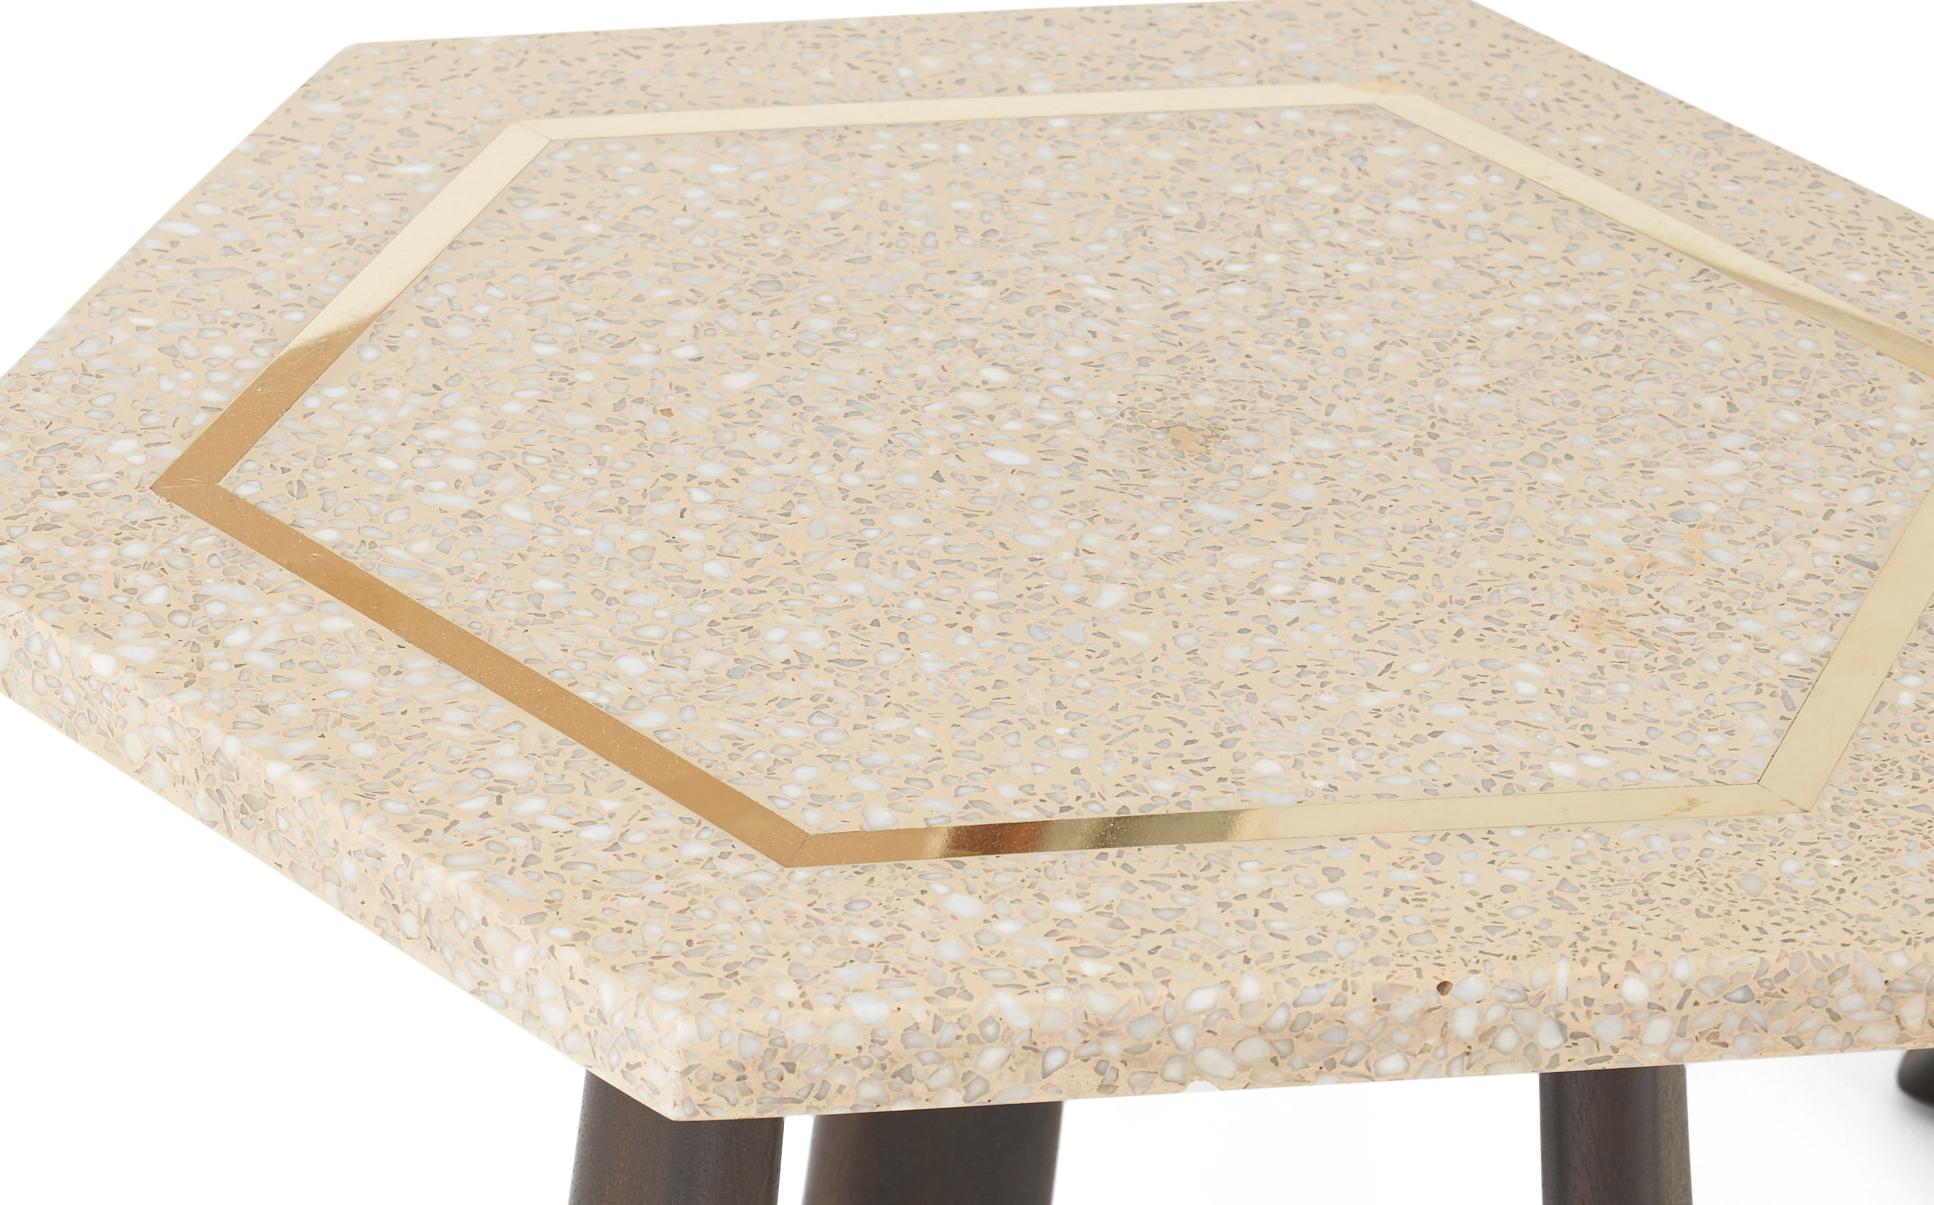 Set of three terrazzo top side tables with inlaid brass detail. Fully restored with refinished bases. Designed by Harvey Probber.